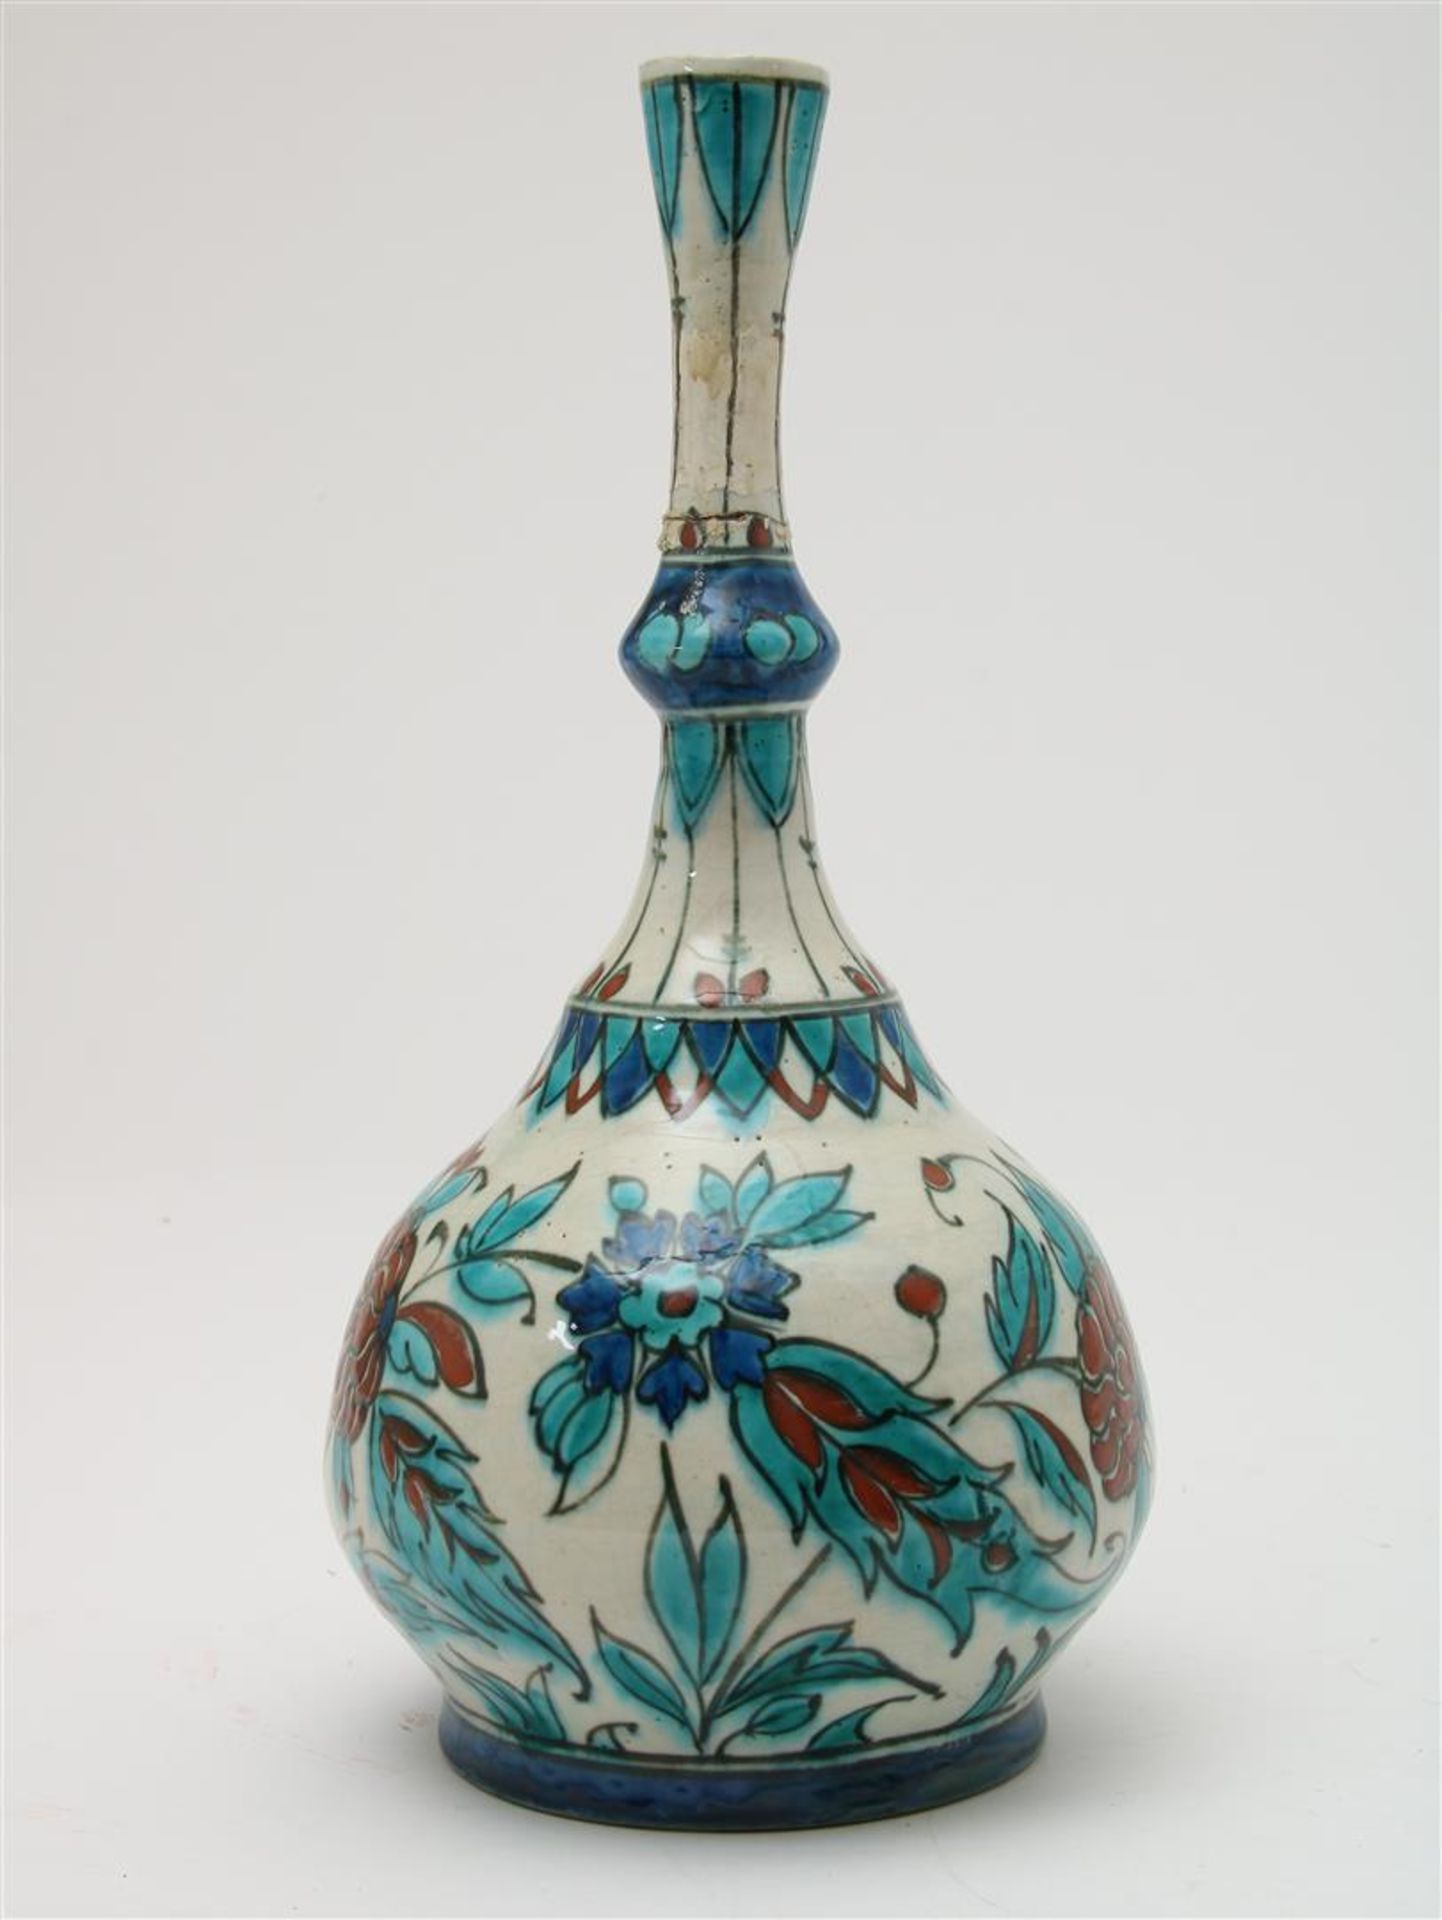 Polychrome earthenware 'New Delft' or 'Iznik' vase with narrow neck and Persian flower decor.